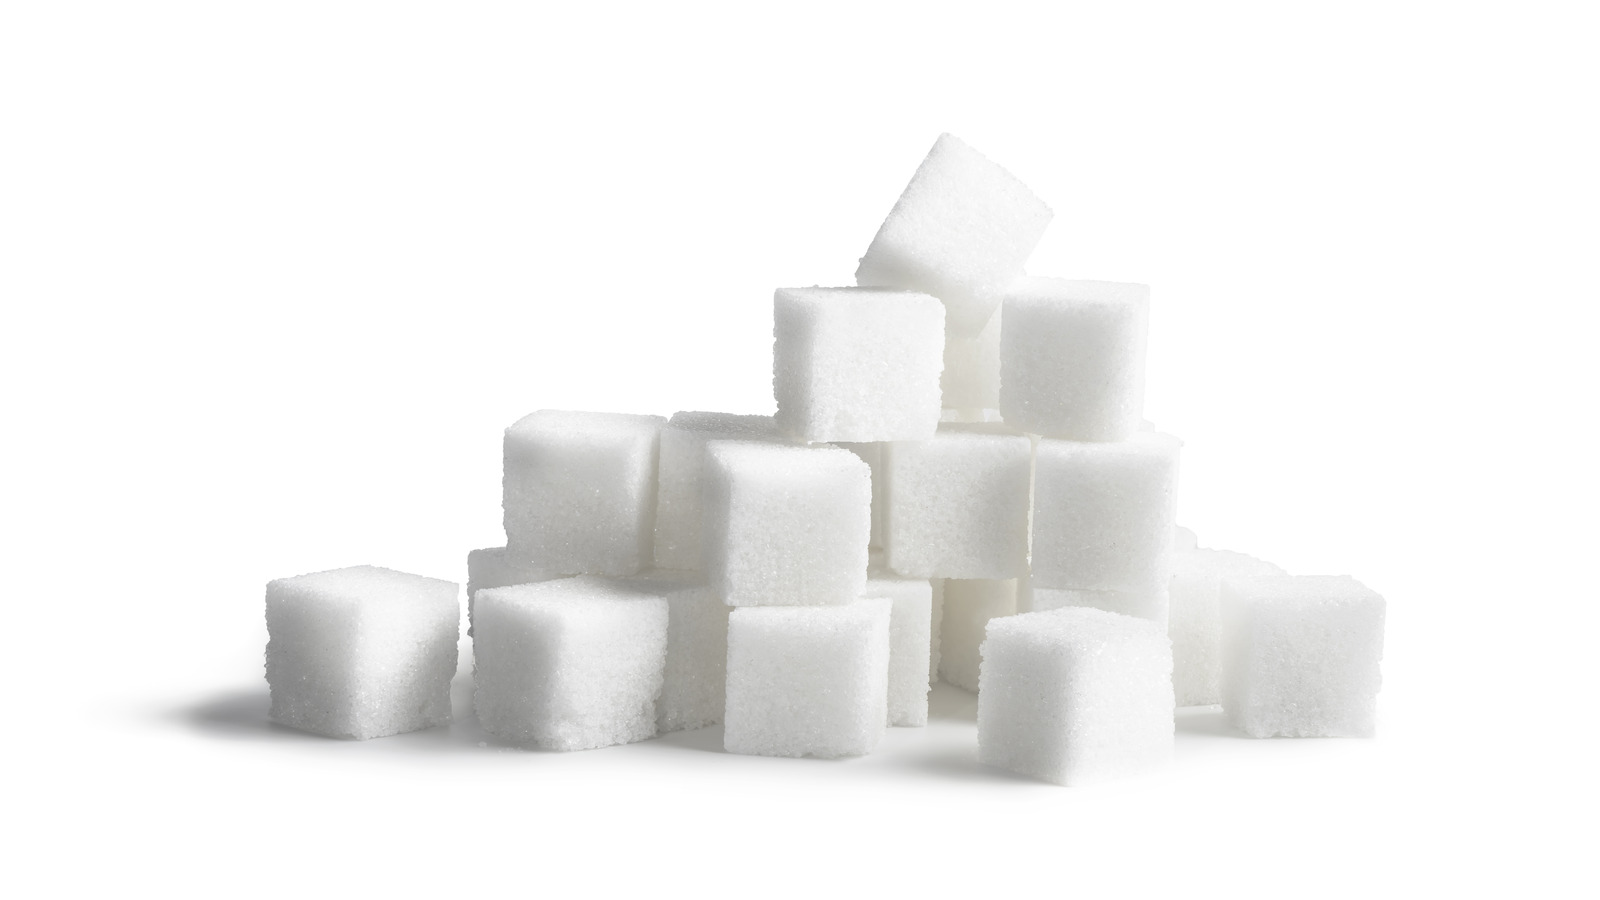 Should You Buy Or Make Your Own Sugar Cubes?